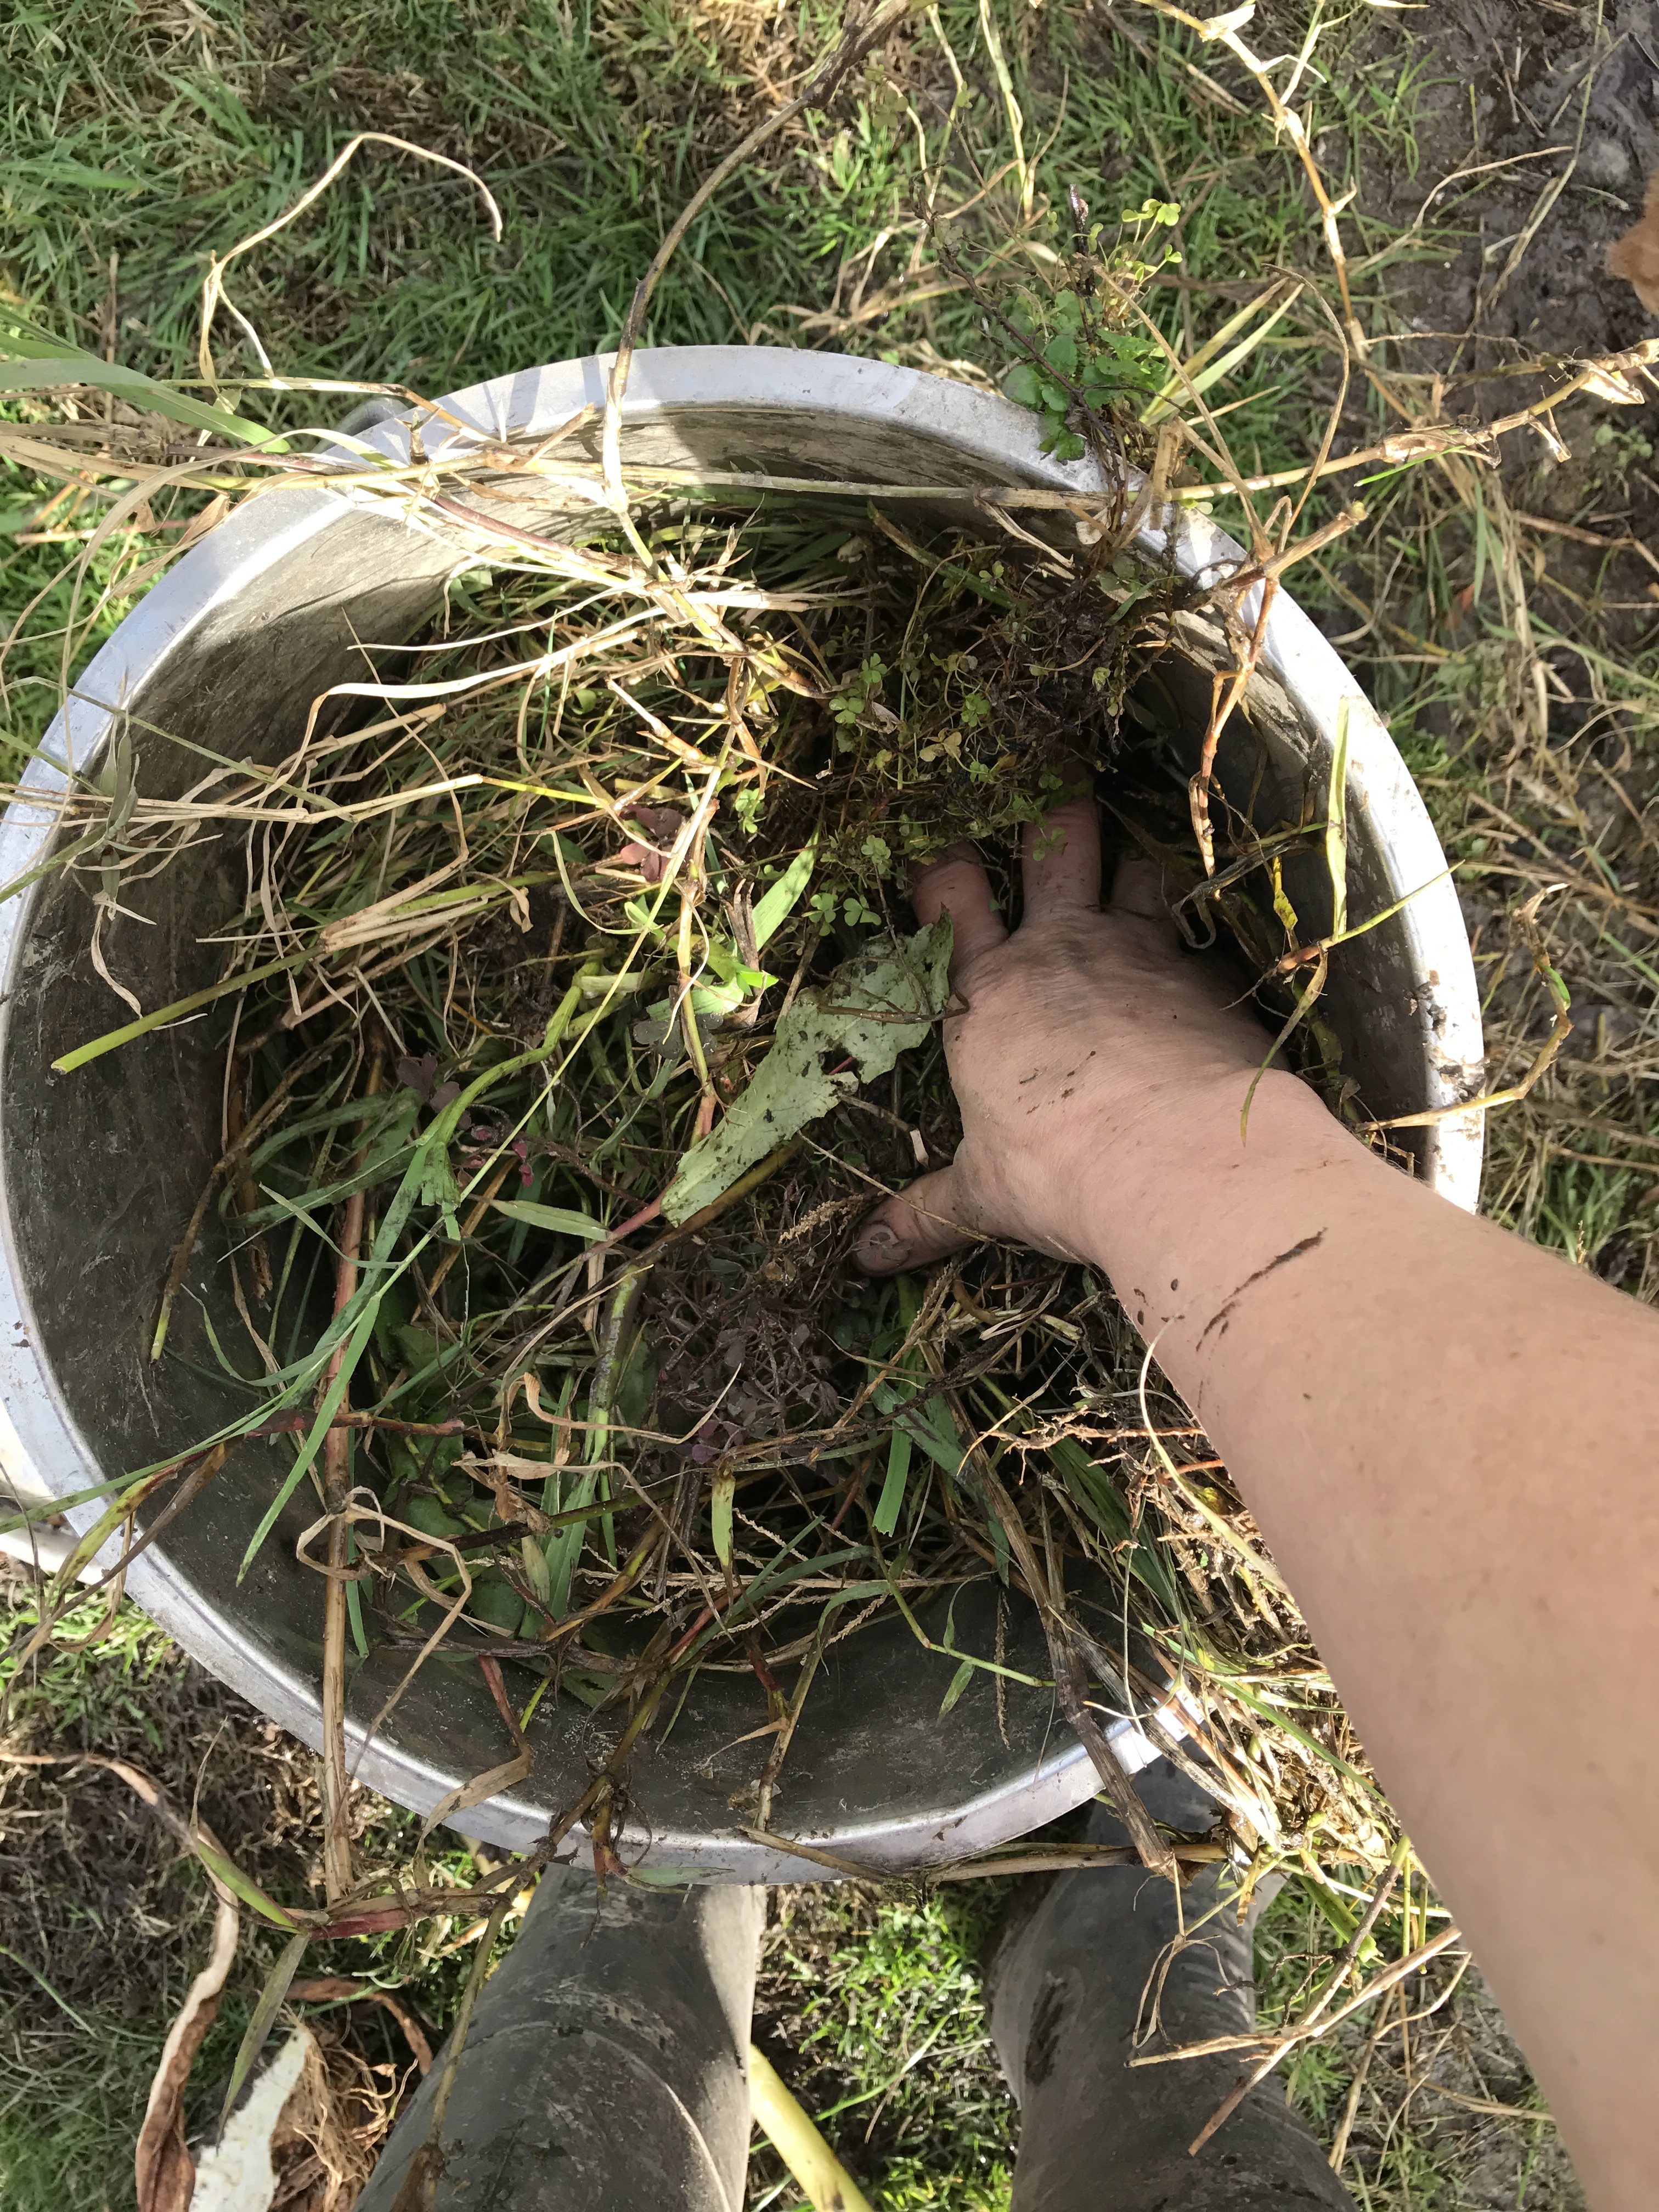 Making weed tea - stuffing a bucket full of weeds